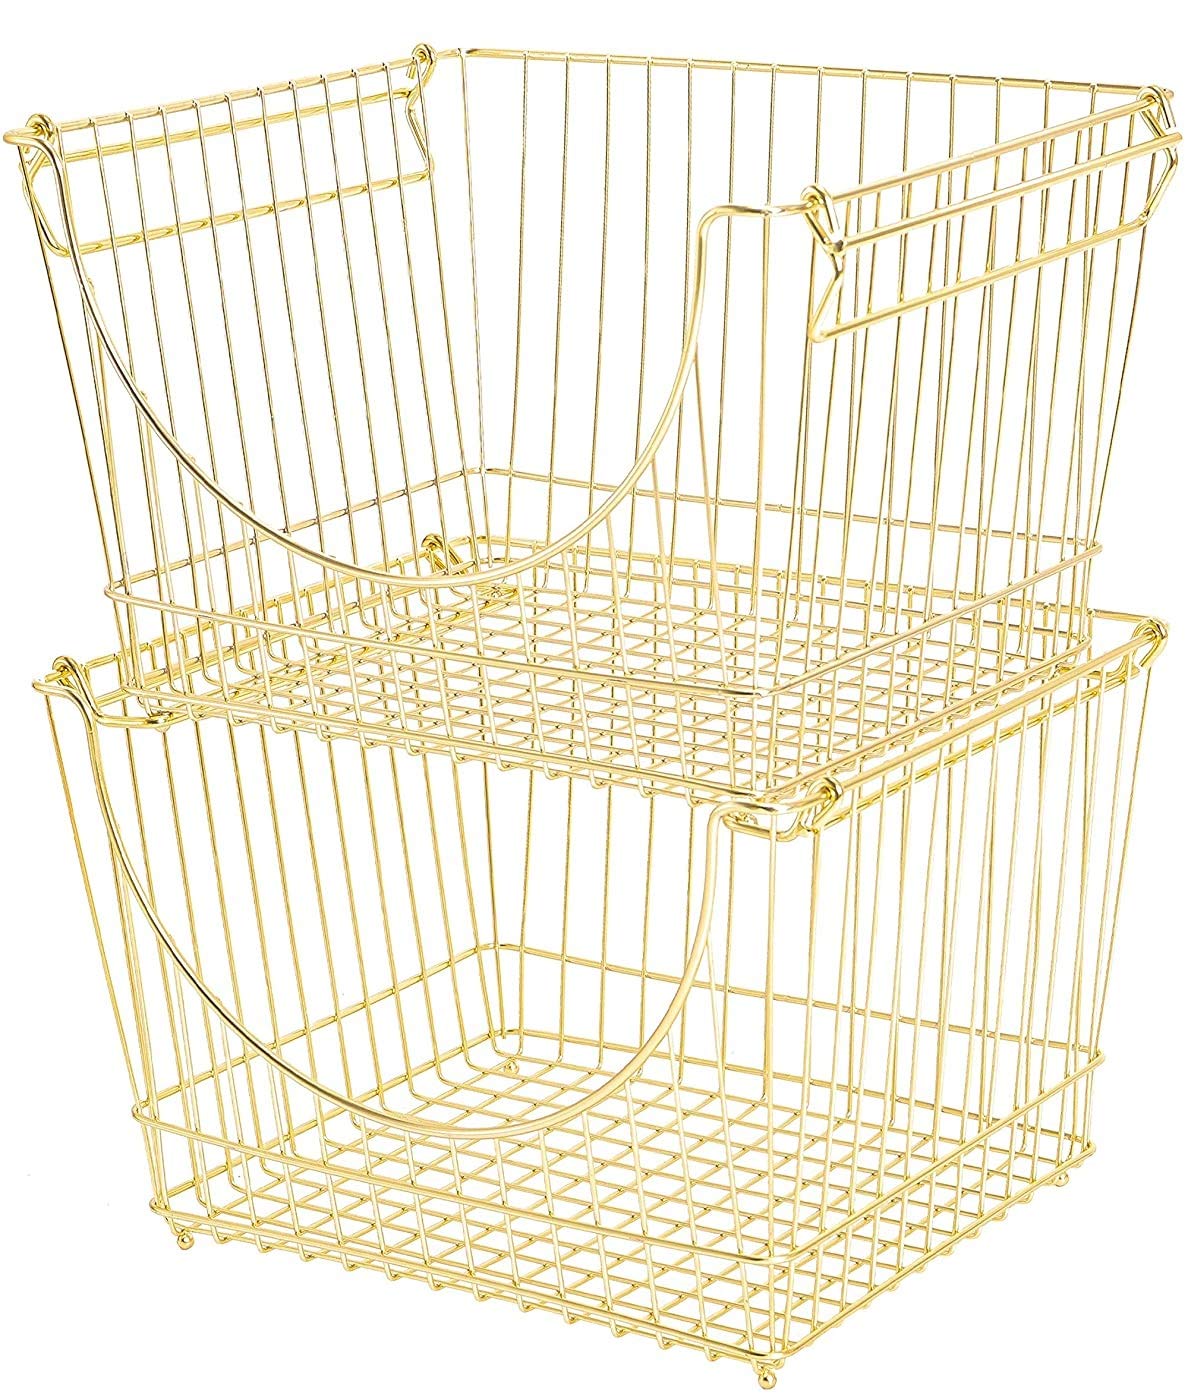 Large Metal Wire Stacking Baskets with Handles - Smart Design® 15